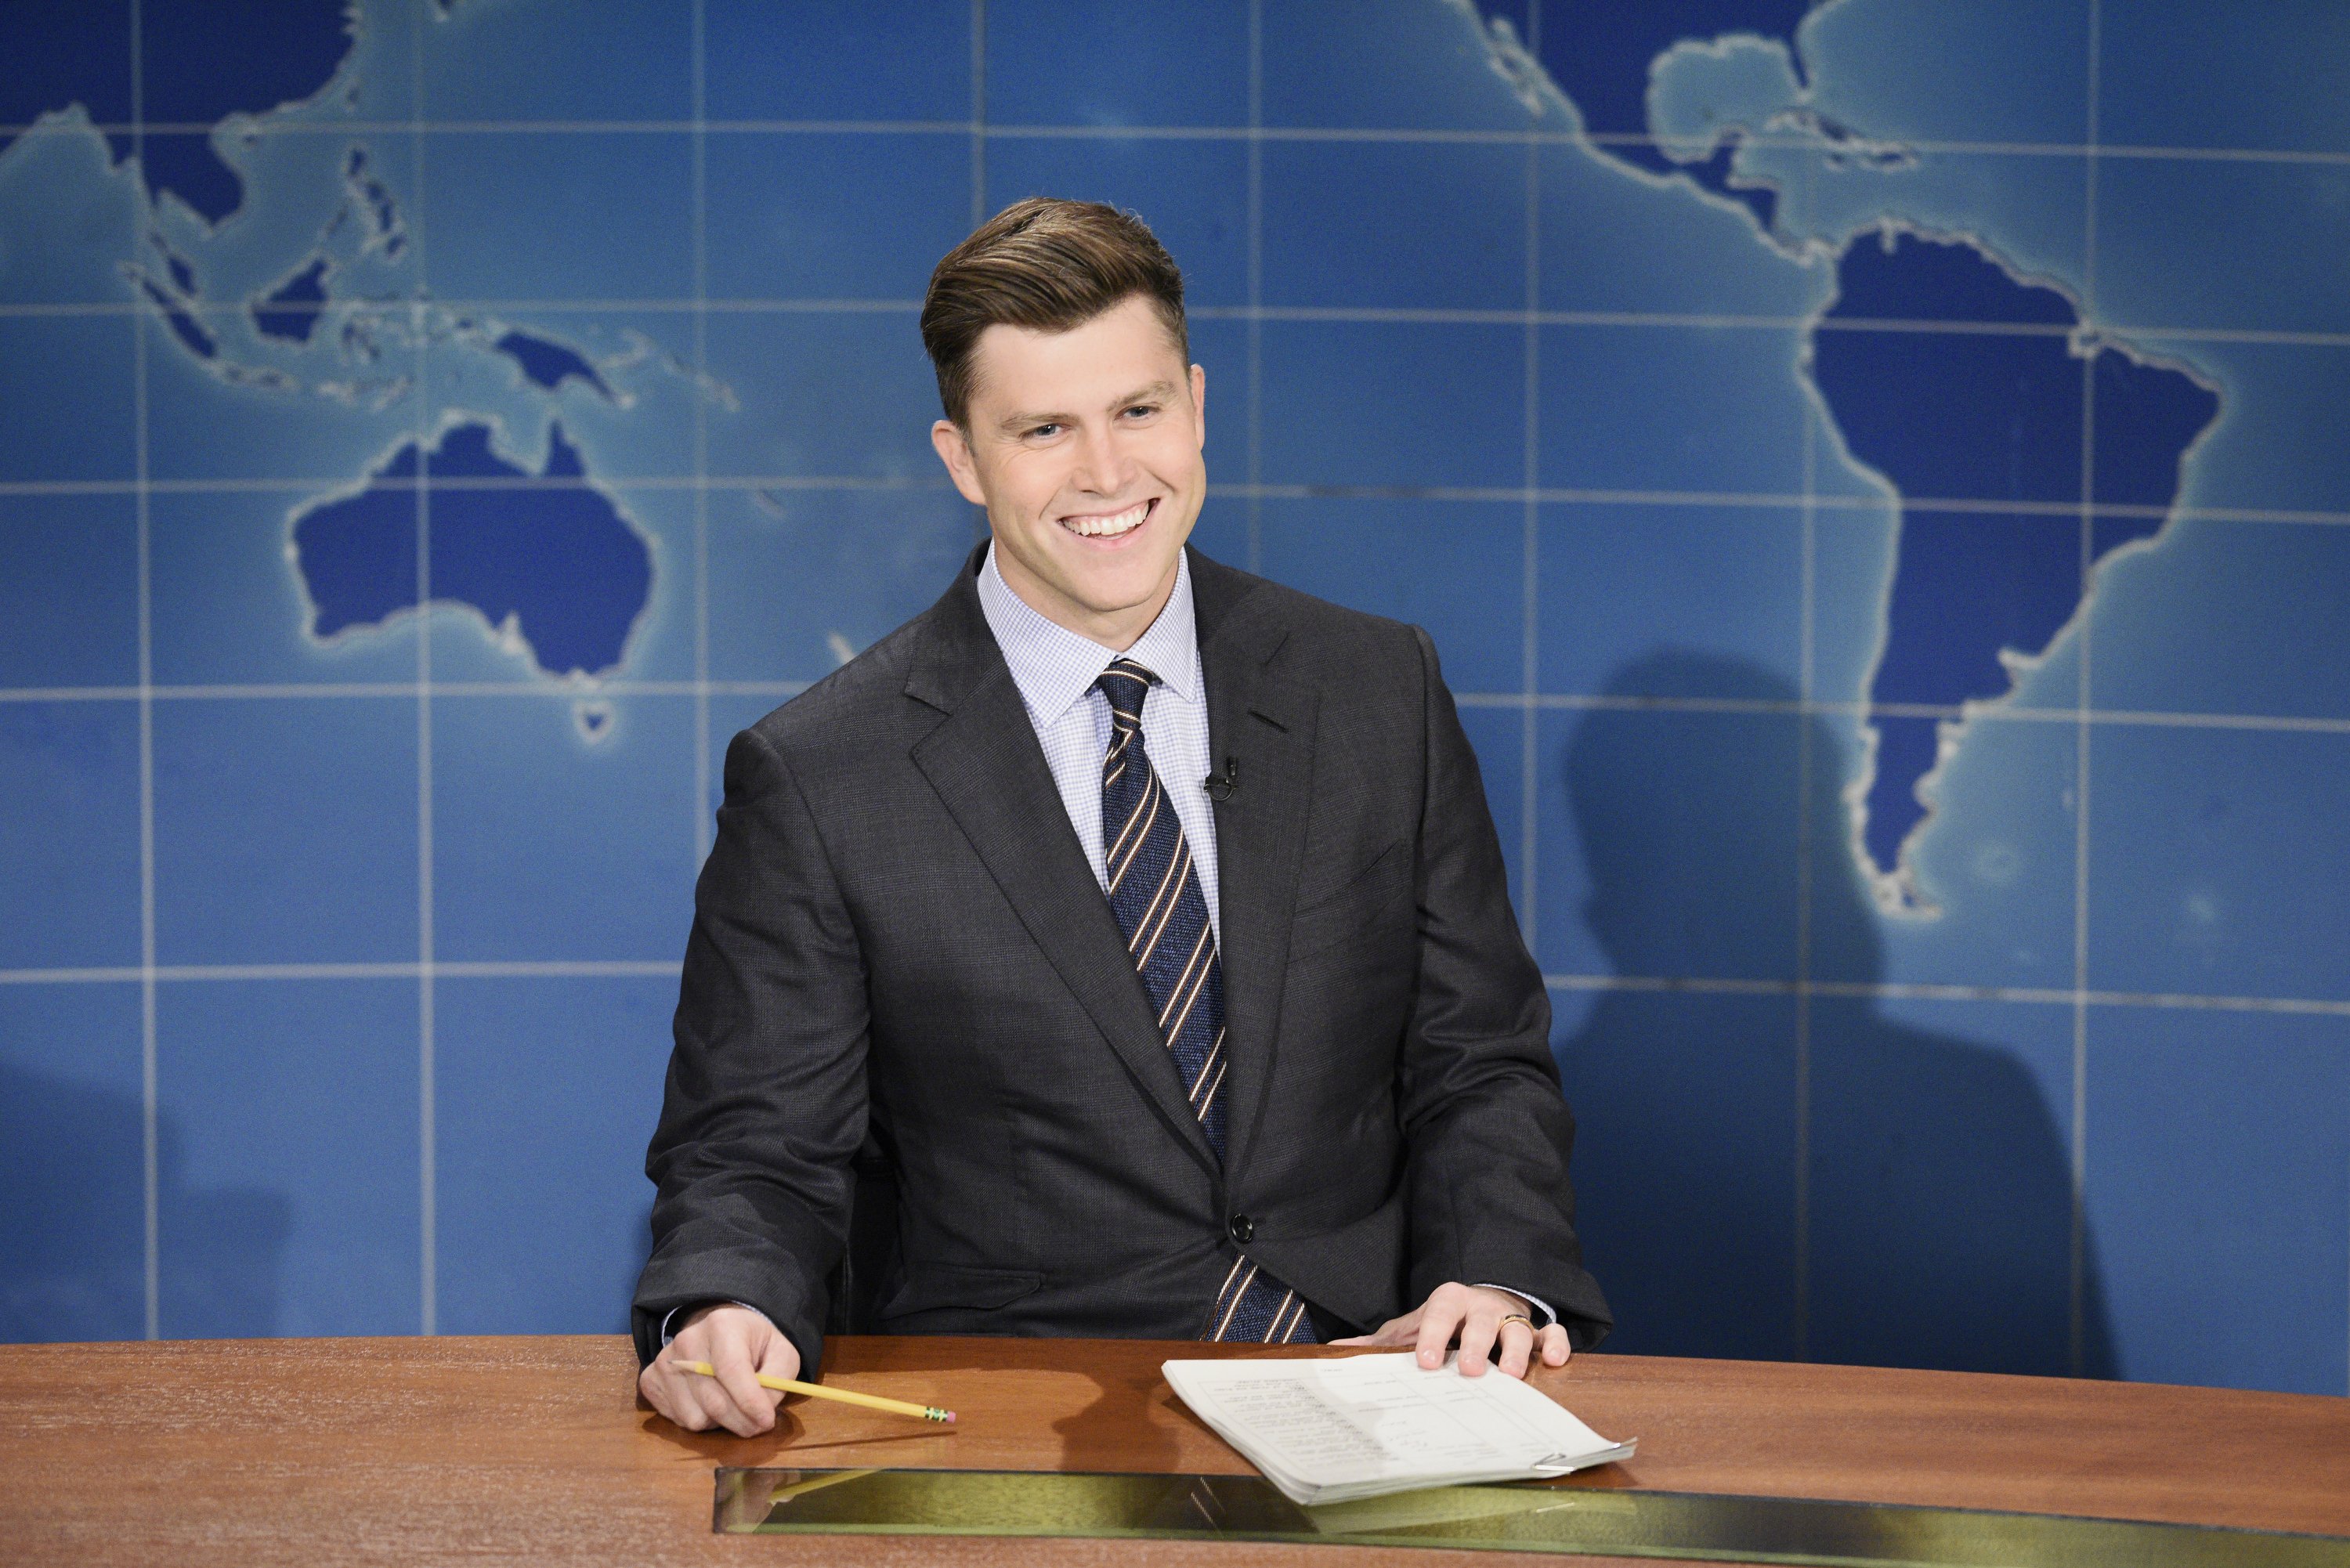 Anchor Colin Jost during the SNL Weekend Update on Saturday, October 31, 2020 | Source: Getty Images